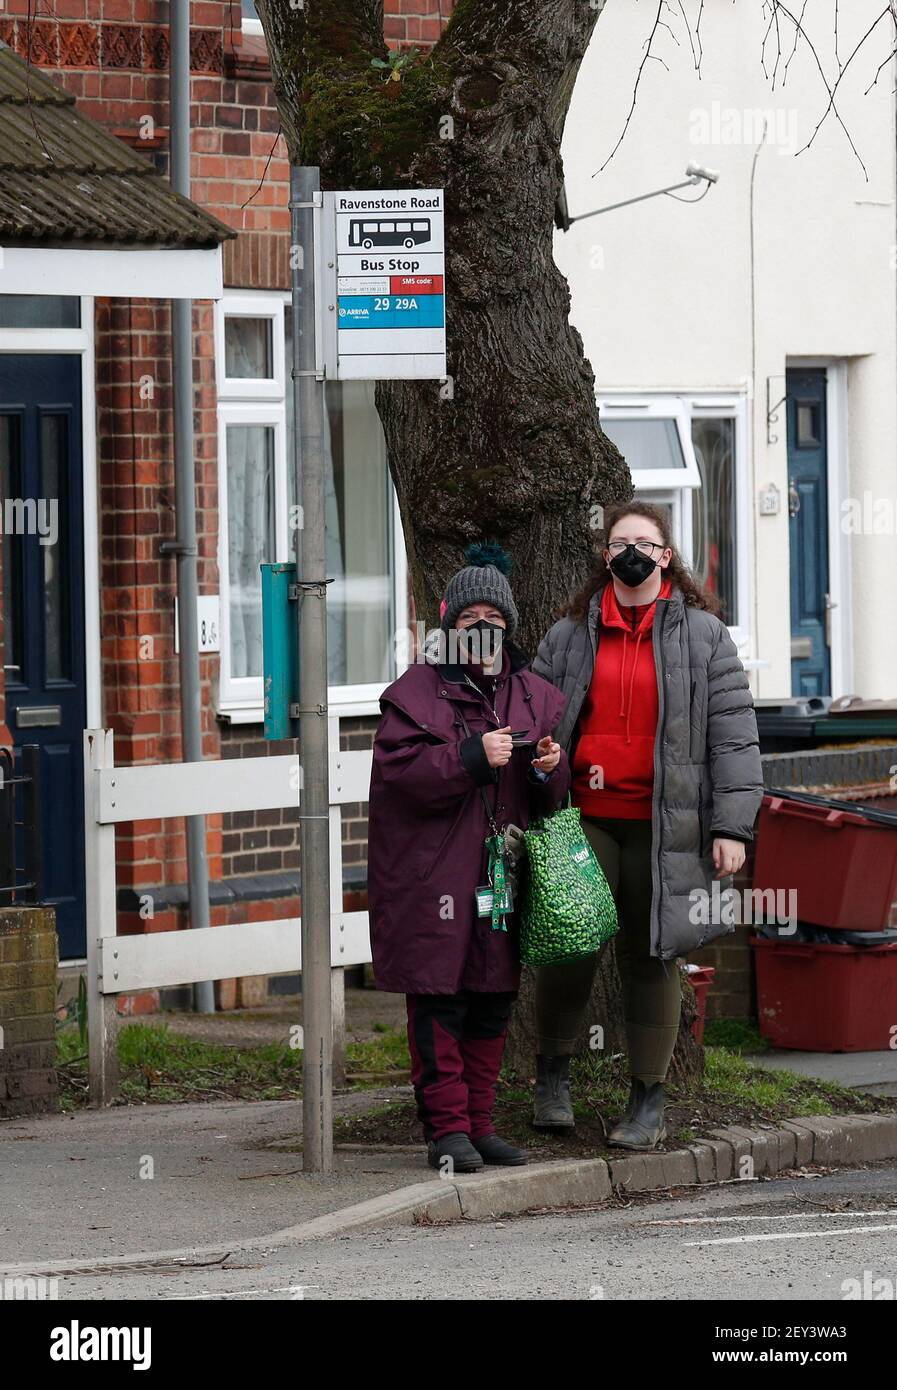 Coalville, Leicestershire, UK. 5th March 2021. Women wait at a bus stop. North West Leicestershire has the highest coronavirus rate in England according to the latest Public Health England figures. Credit Darren Staples/Alamy Live News. Stock Photo